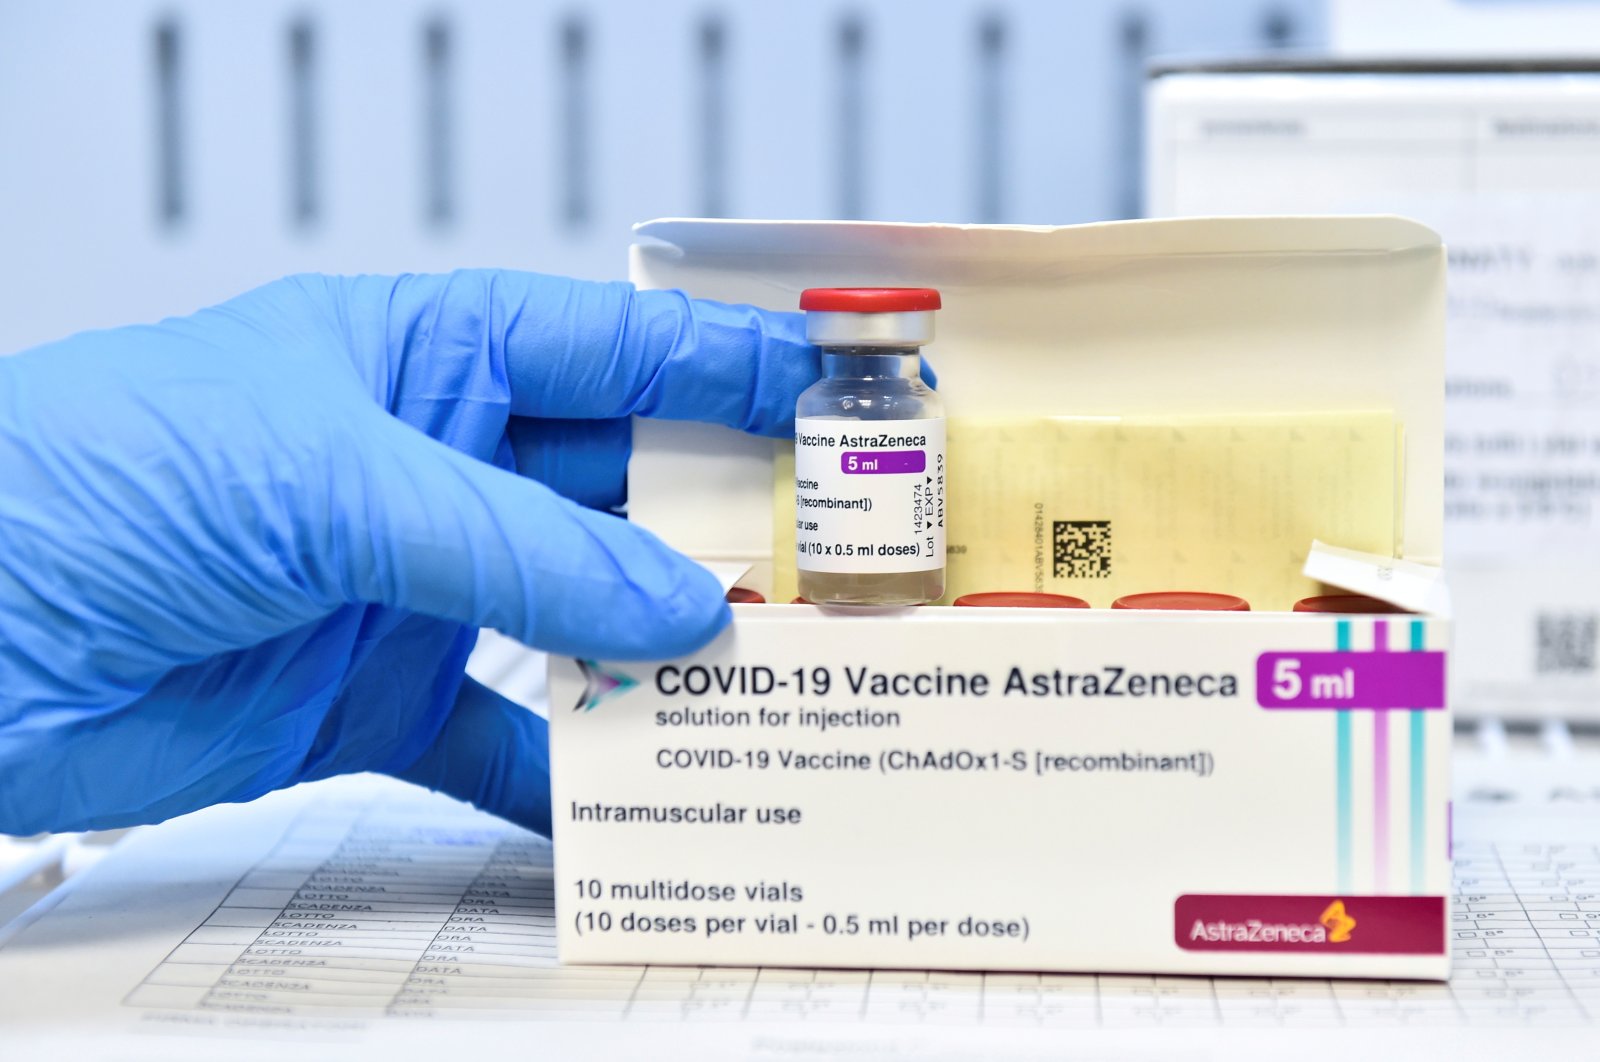 A healthcare worker shows a vial and a box of AstraZeneca's COVID-19 vaccine, in Turin, Italy, March 19, 2021. (Reuters Photo)